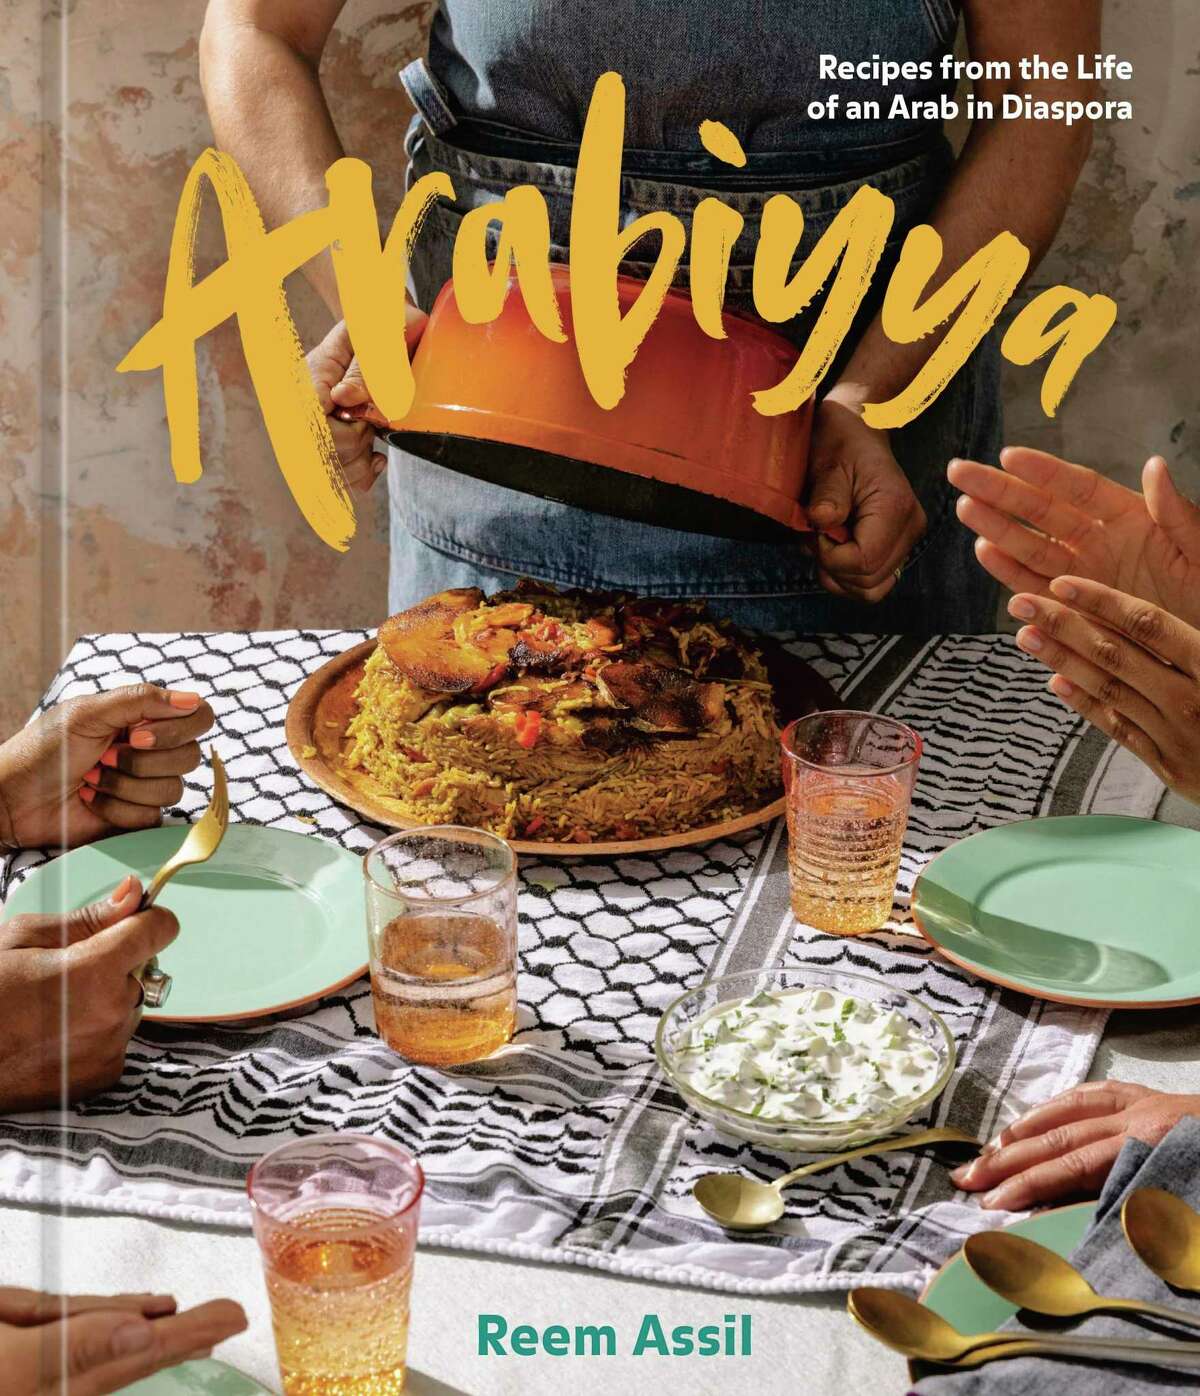 The cover of "Arabiyya: Recipes from the Life of an Arab in Diaspora" by Reem Assil.